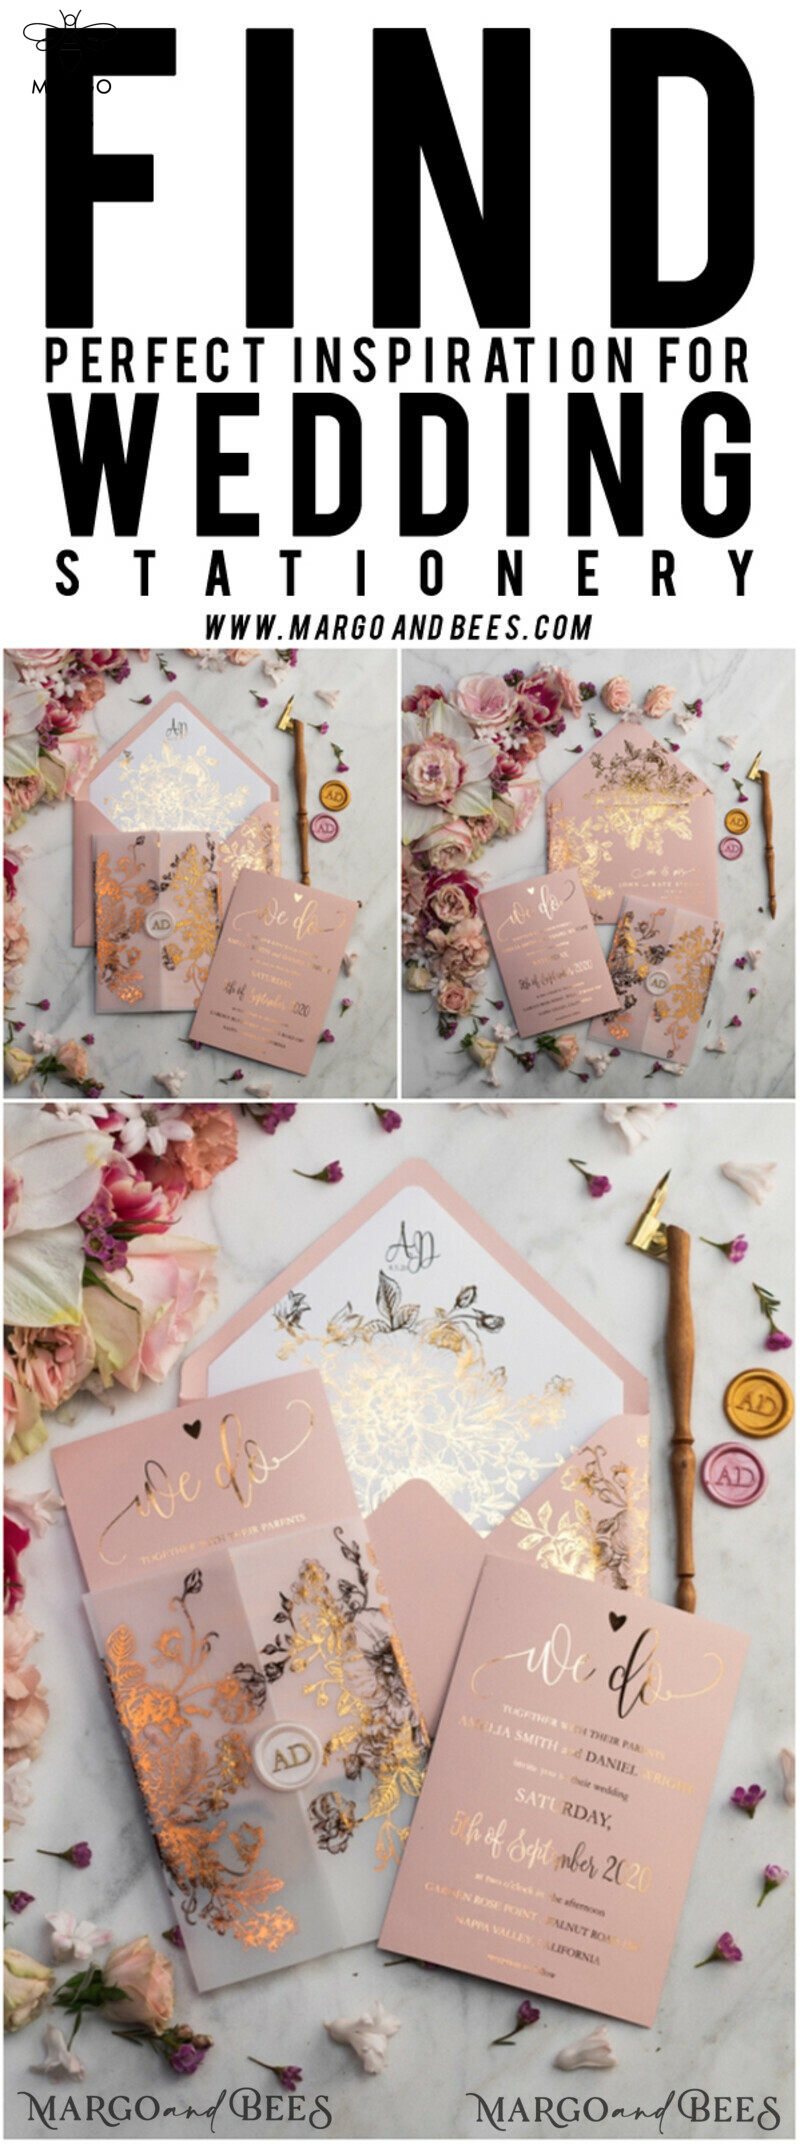 Blush Gold Wedding Invitations , Luxury Gold  Wedding Cards, Gold Vellum wrapping and wax seal Wedding stationery -65